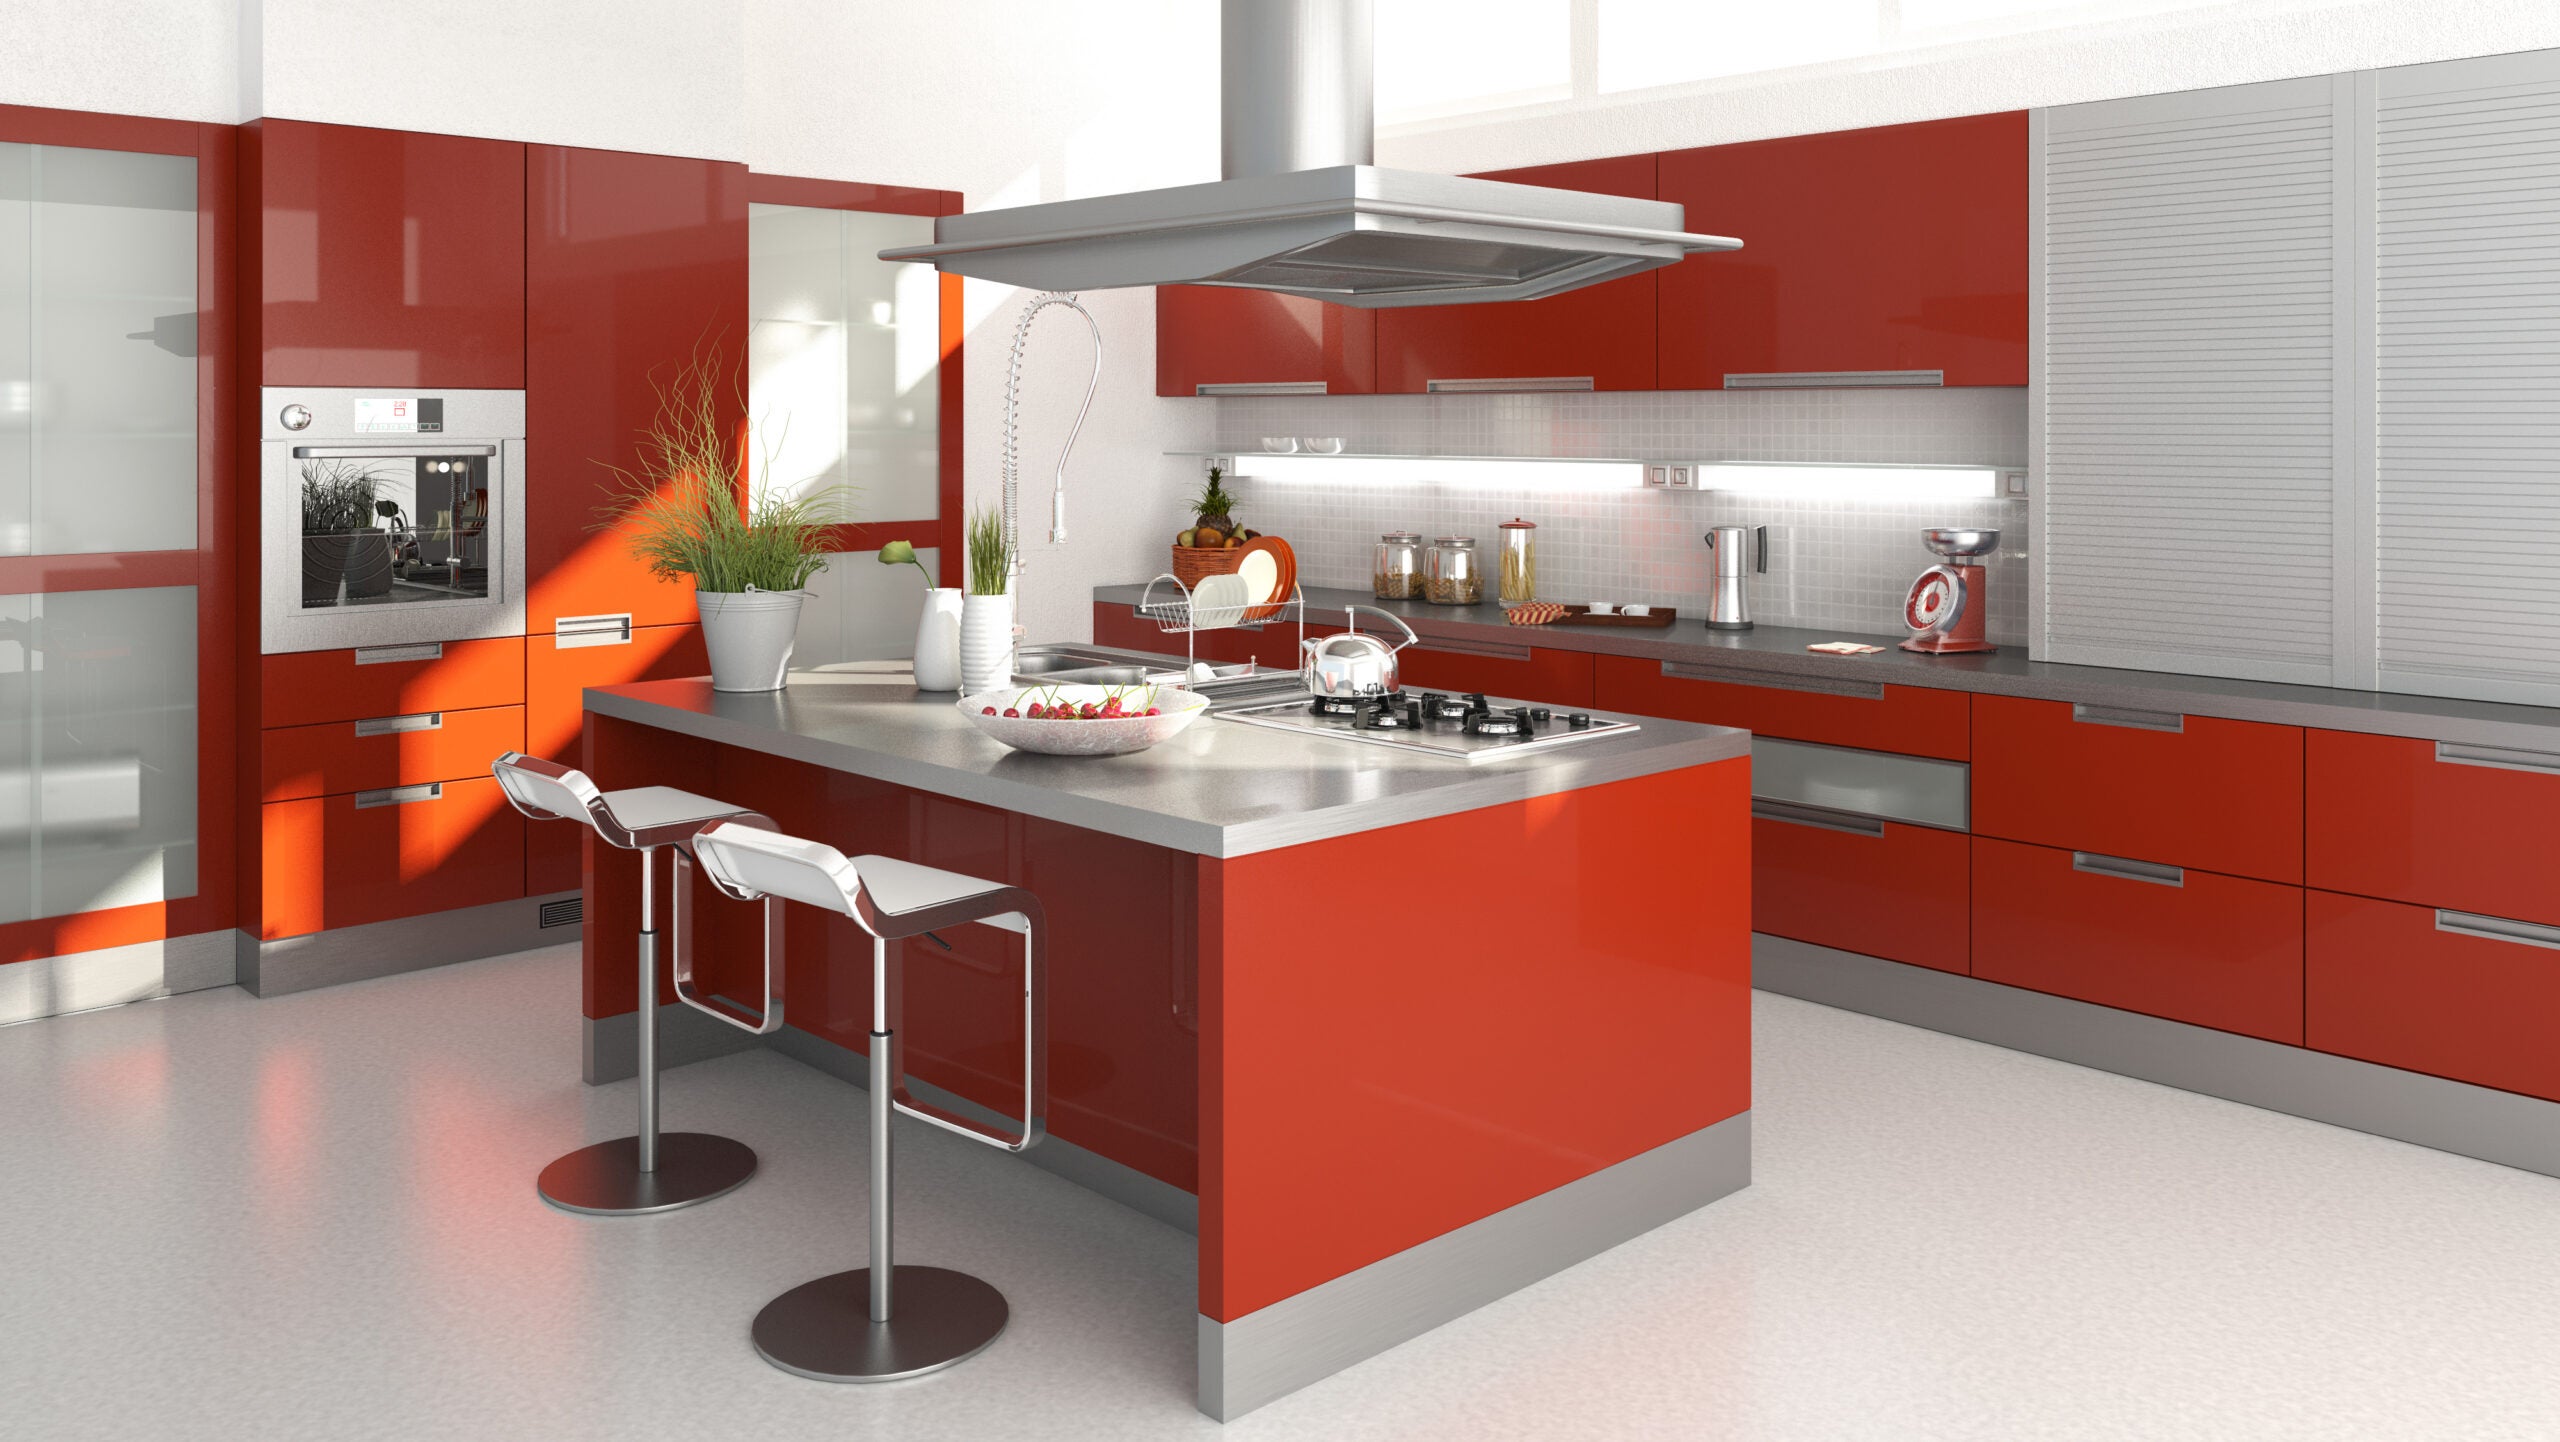 Modern red kitchen: how to furnish it